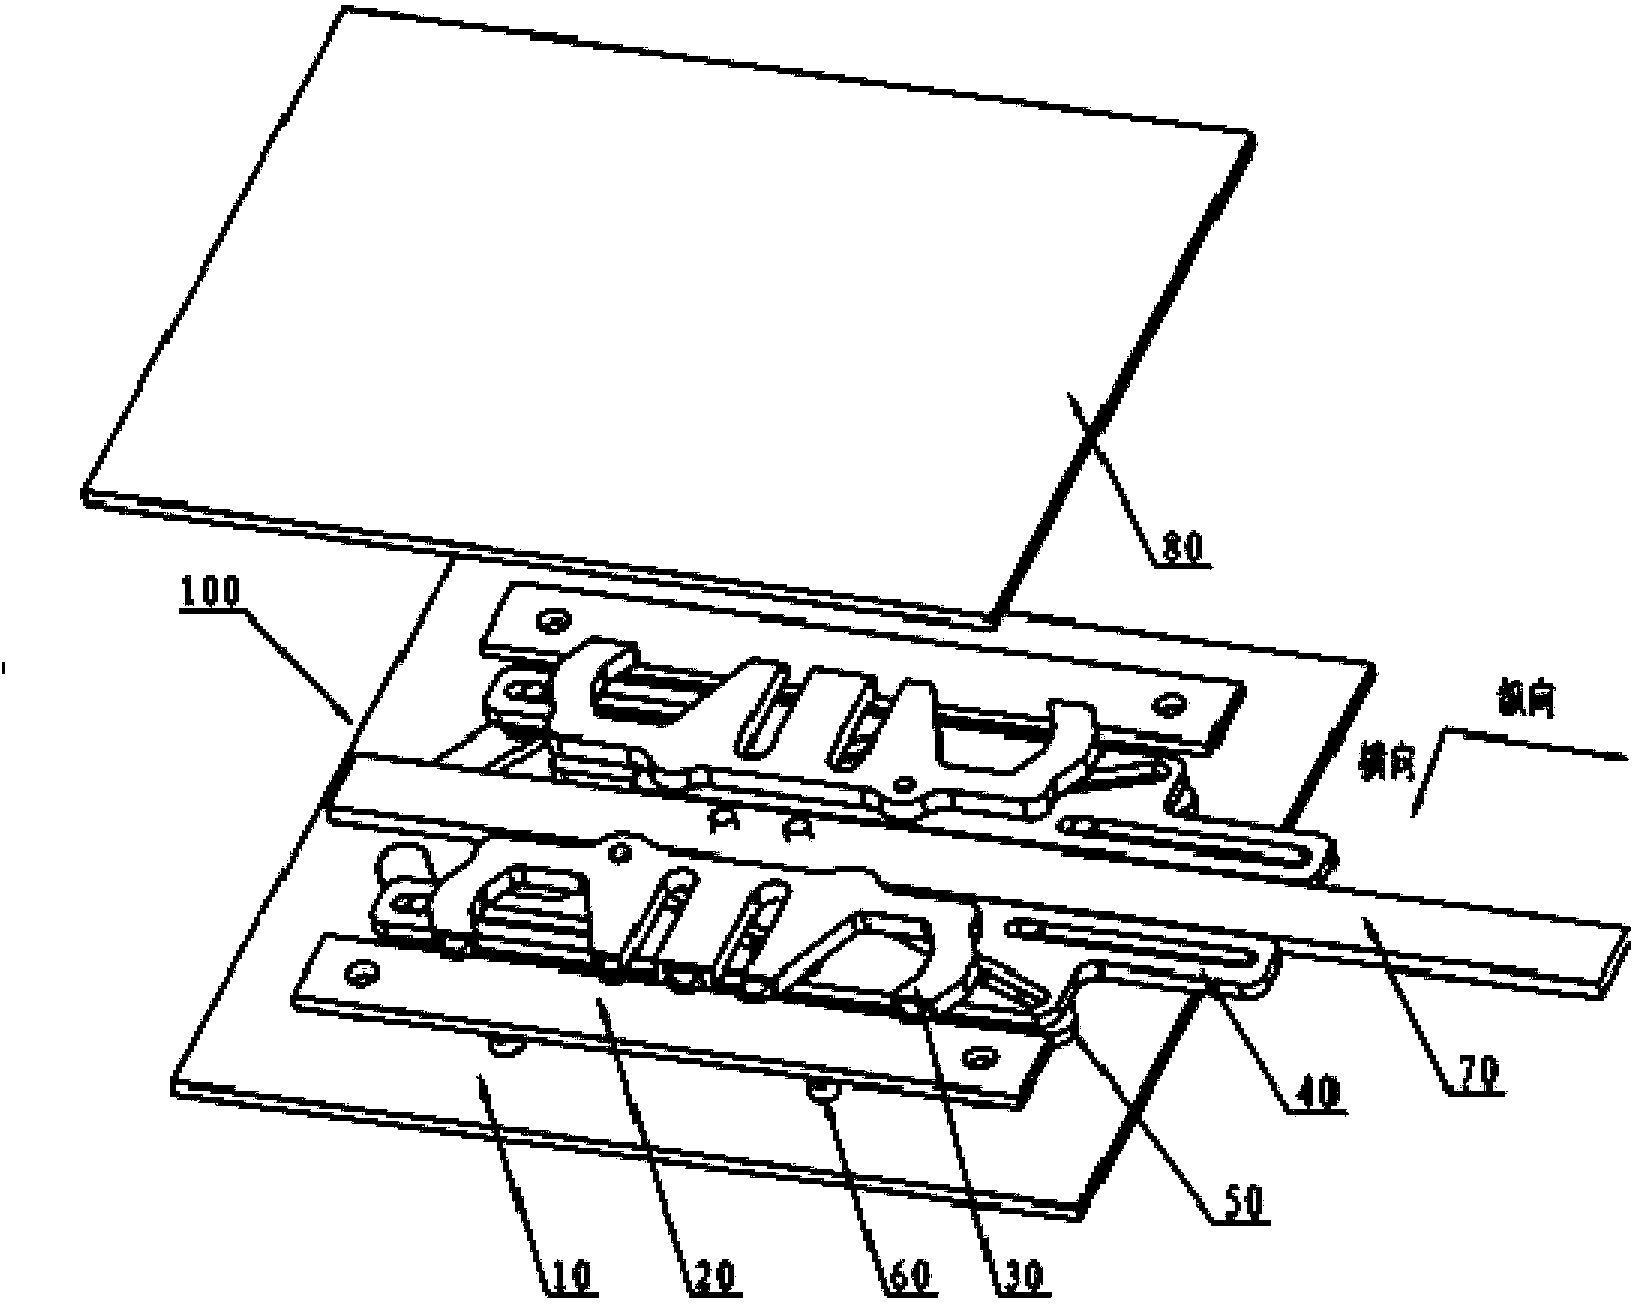 Ultra-wide-band miniaturized phase shifter unit and linkage mechanism thereof